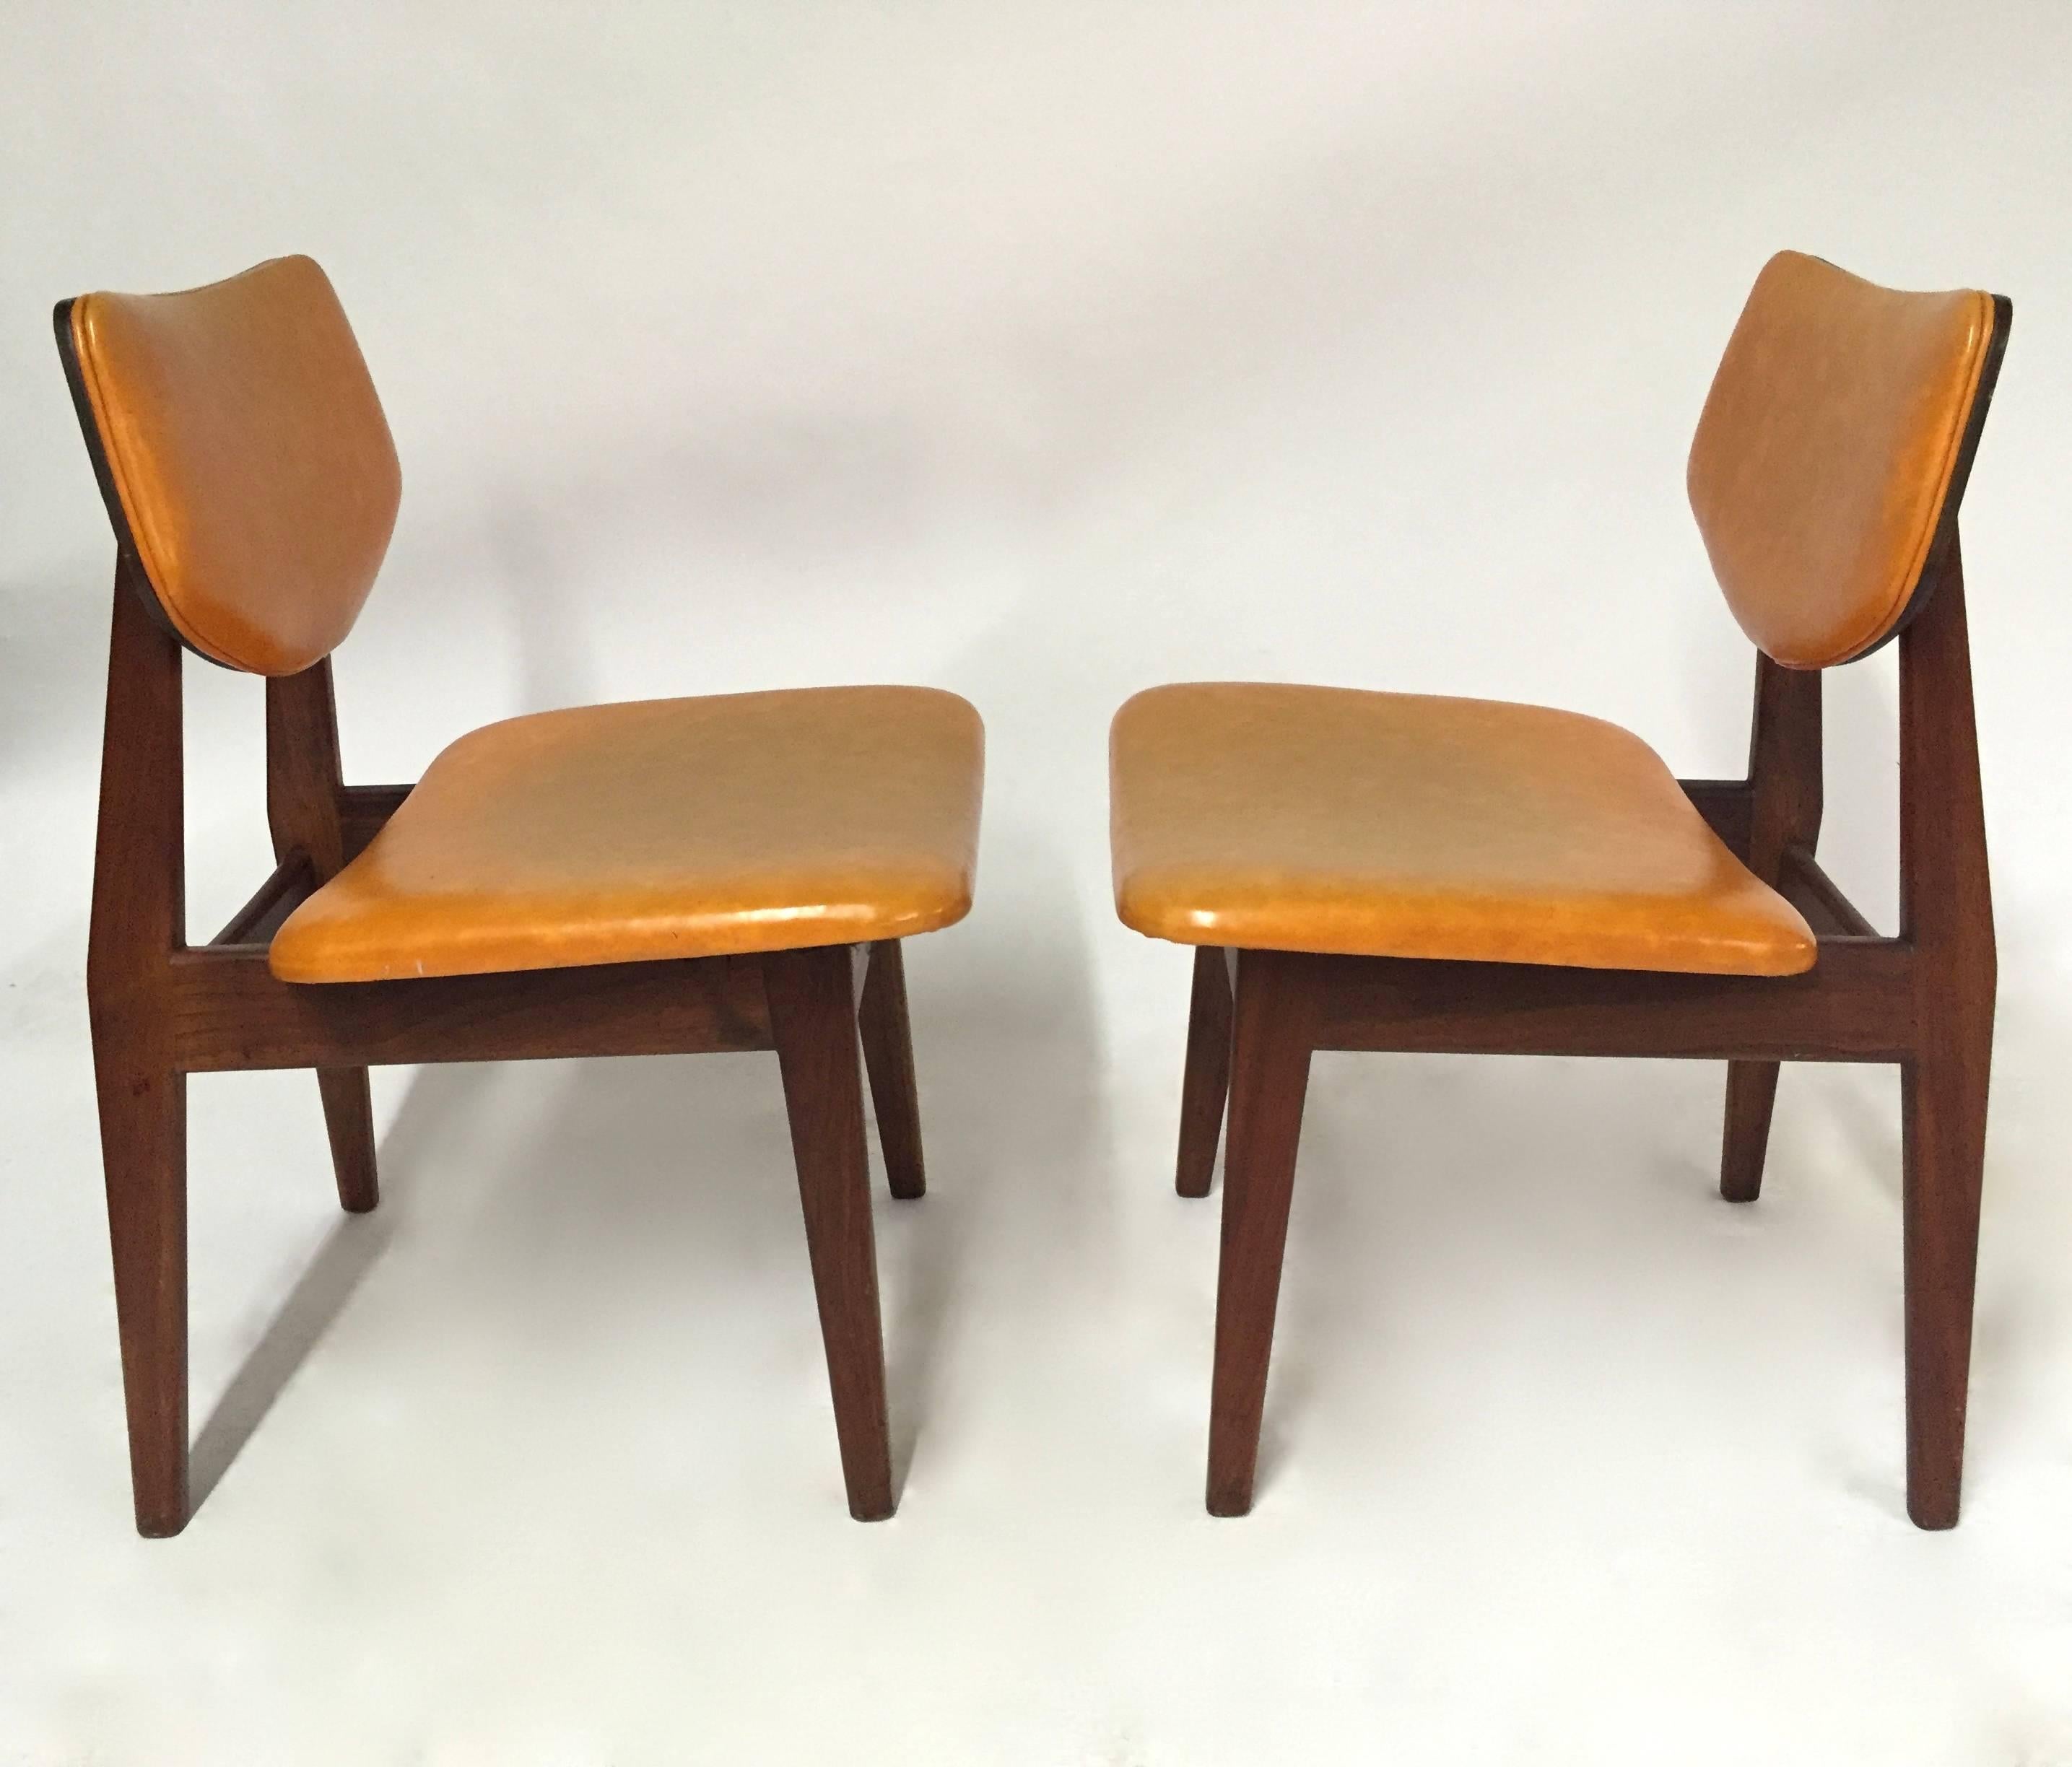 Mid-Century Modern Pair of Early Jens Risom Chairs in Original Vinyl, circa 1950, Made in America